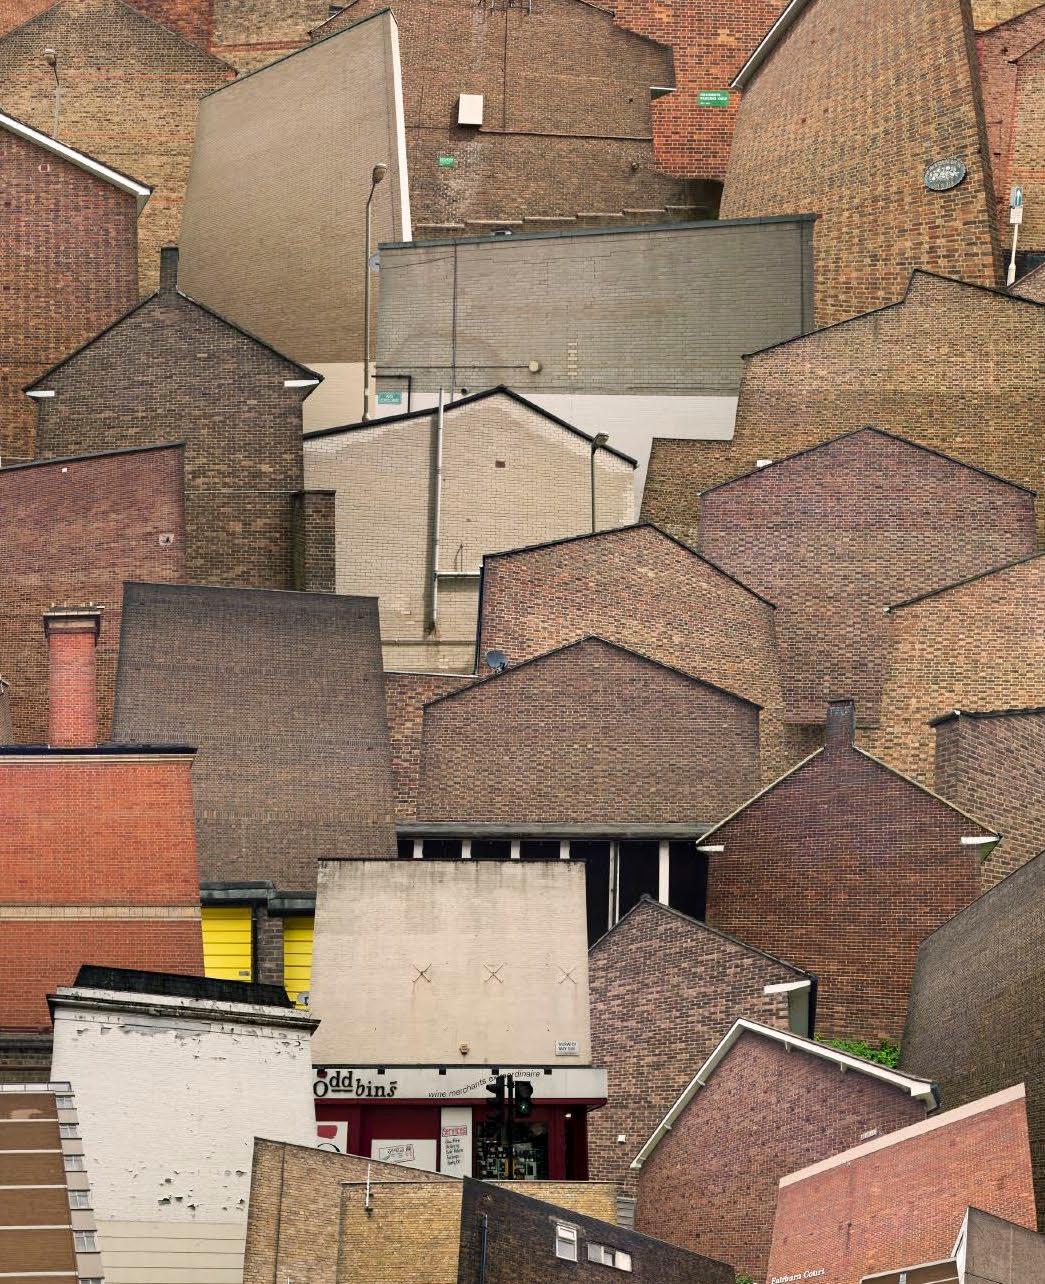 Hubert Blanz
Homeseekers - A City from Behind (Detail 5), 2016
C-print, 40 x 70 cm
ed. 3+1 AP
Print comes with a signed self-adhesive label

Hubert Blanz's artistic works mainly deal with urban infrastructure, spatial patterns and geographic as well